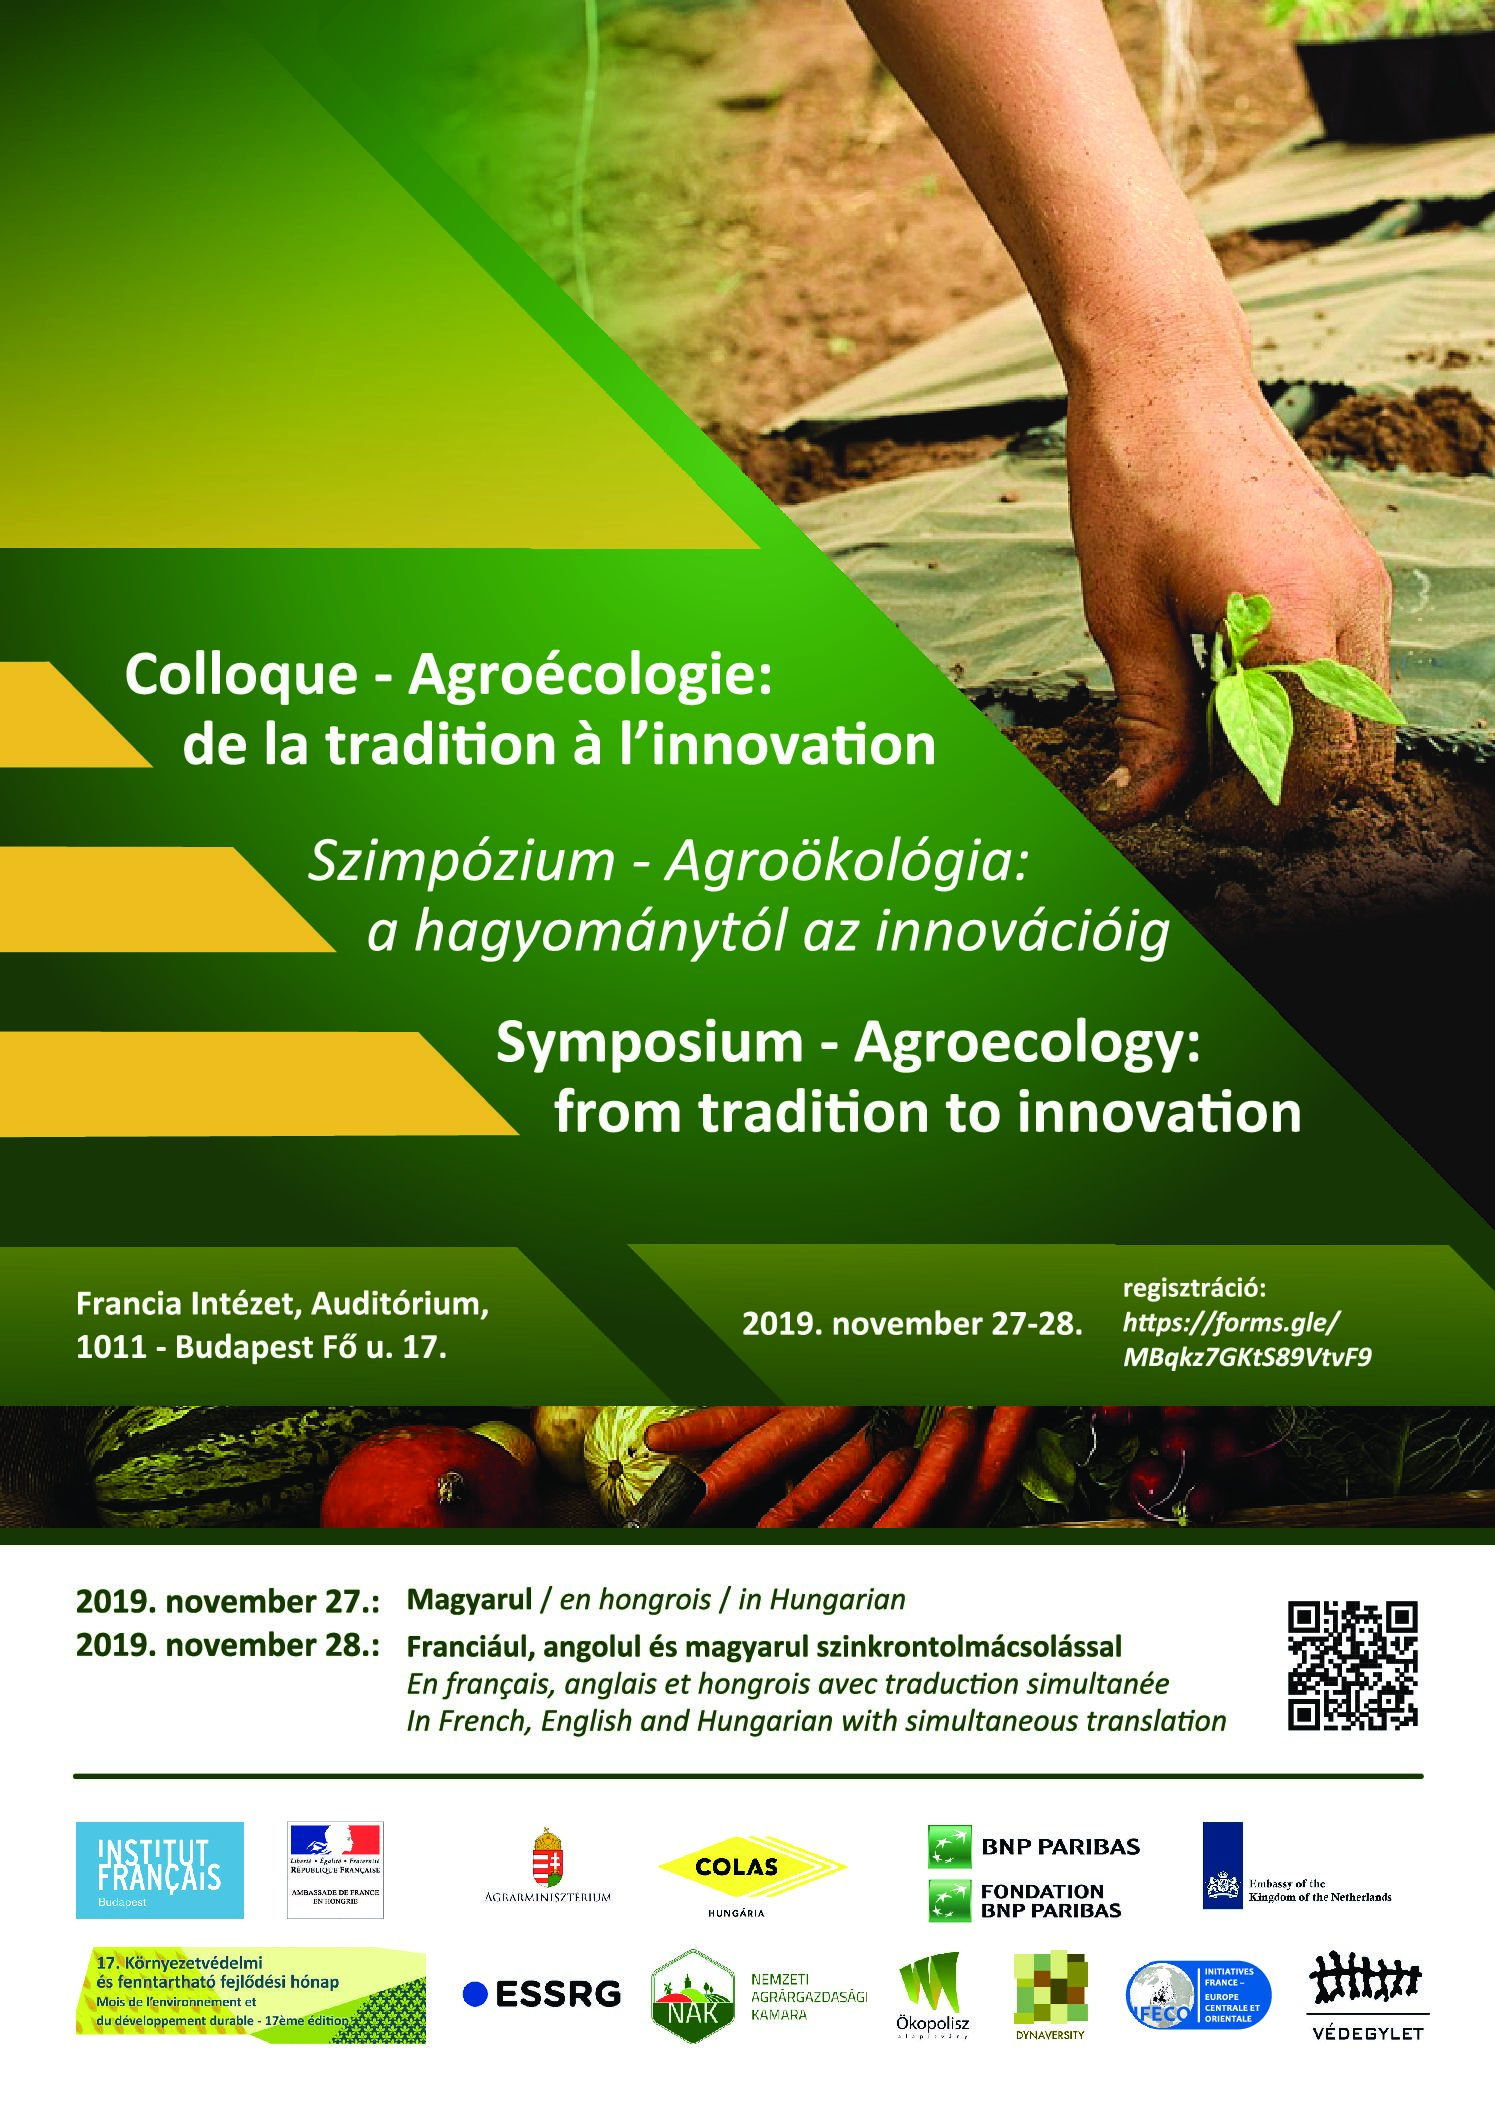 Governance of agroecological transition and new farming practices